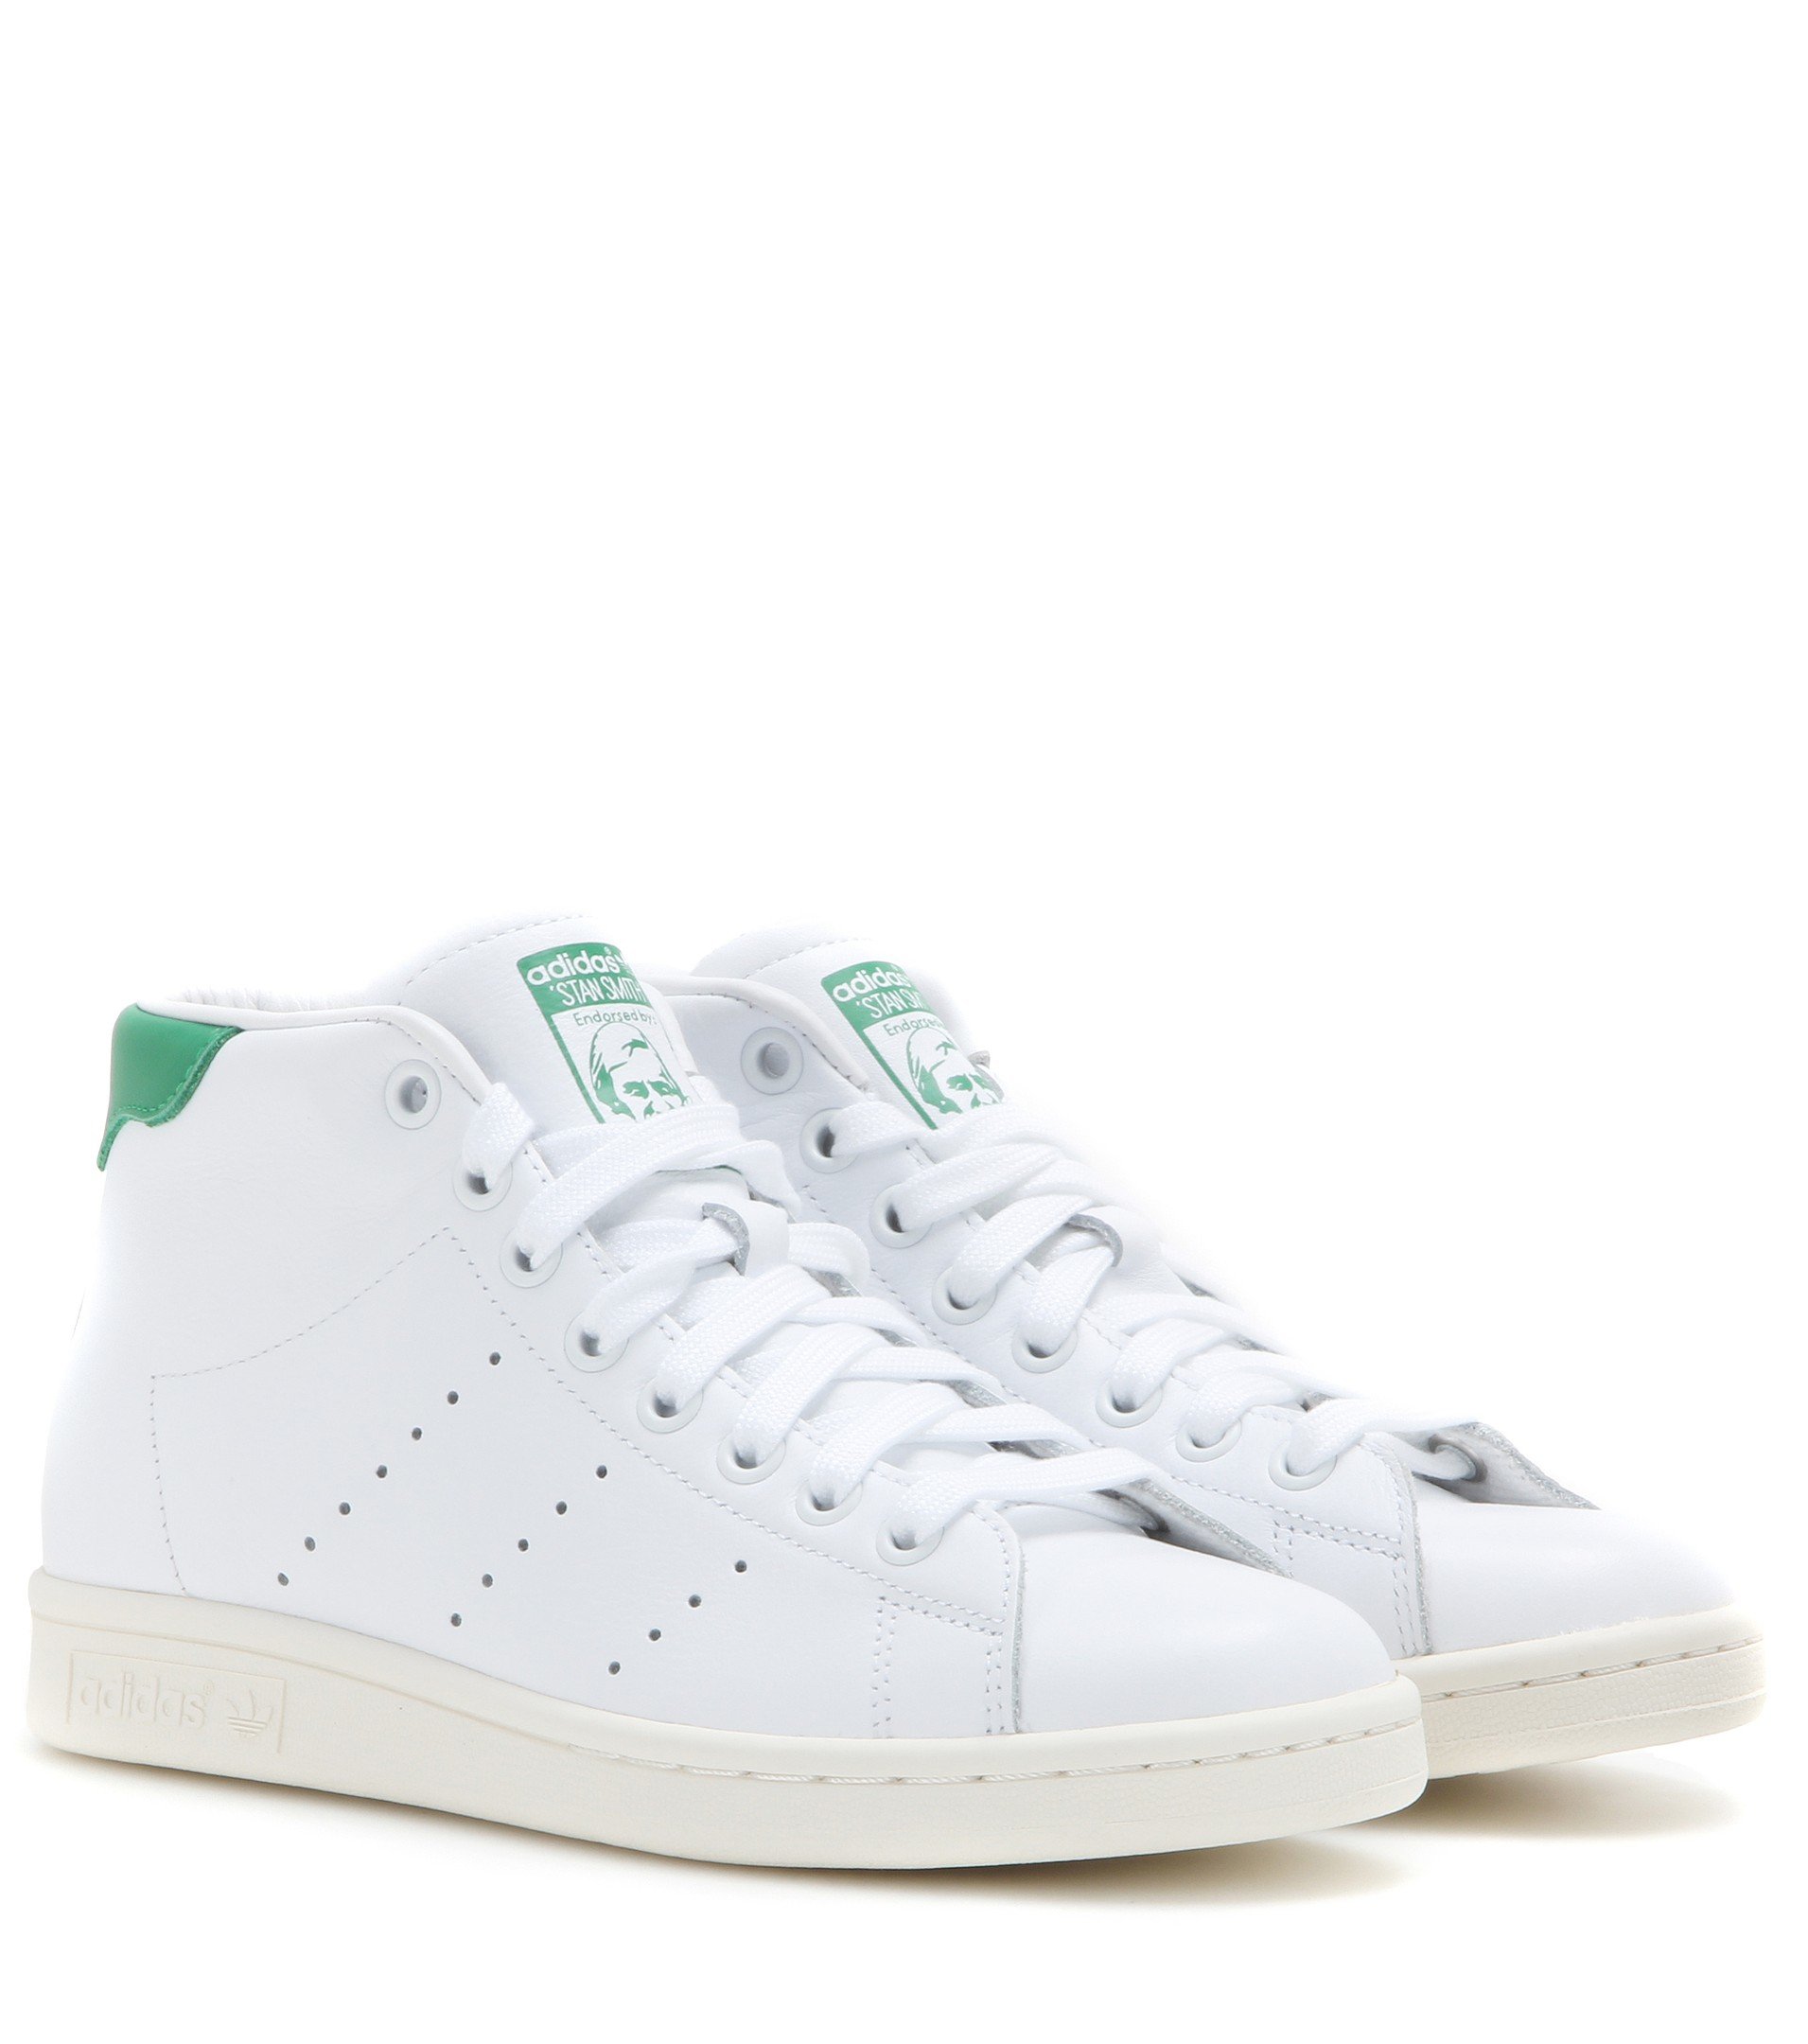 Stan Smith Mid Leather High-top Sneakers in White |